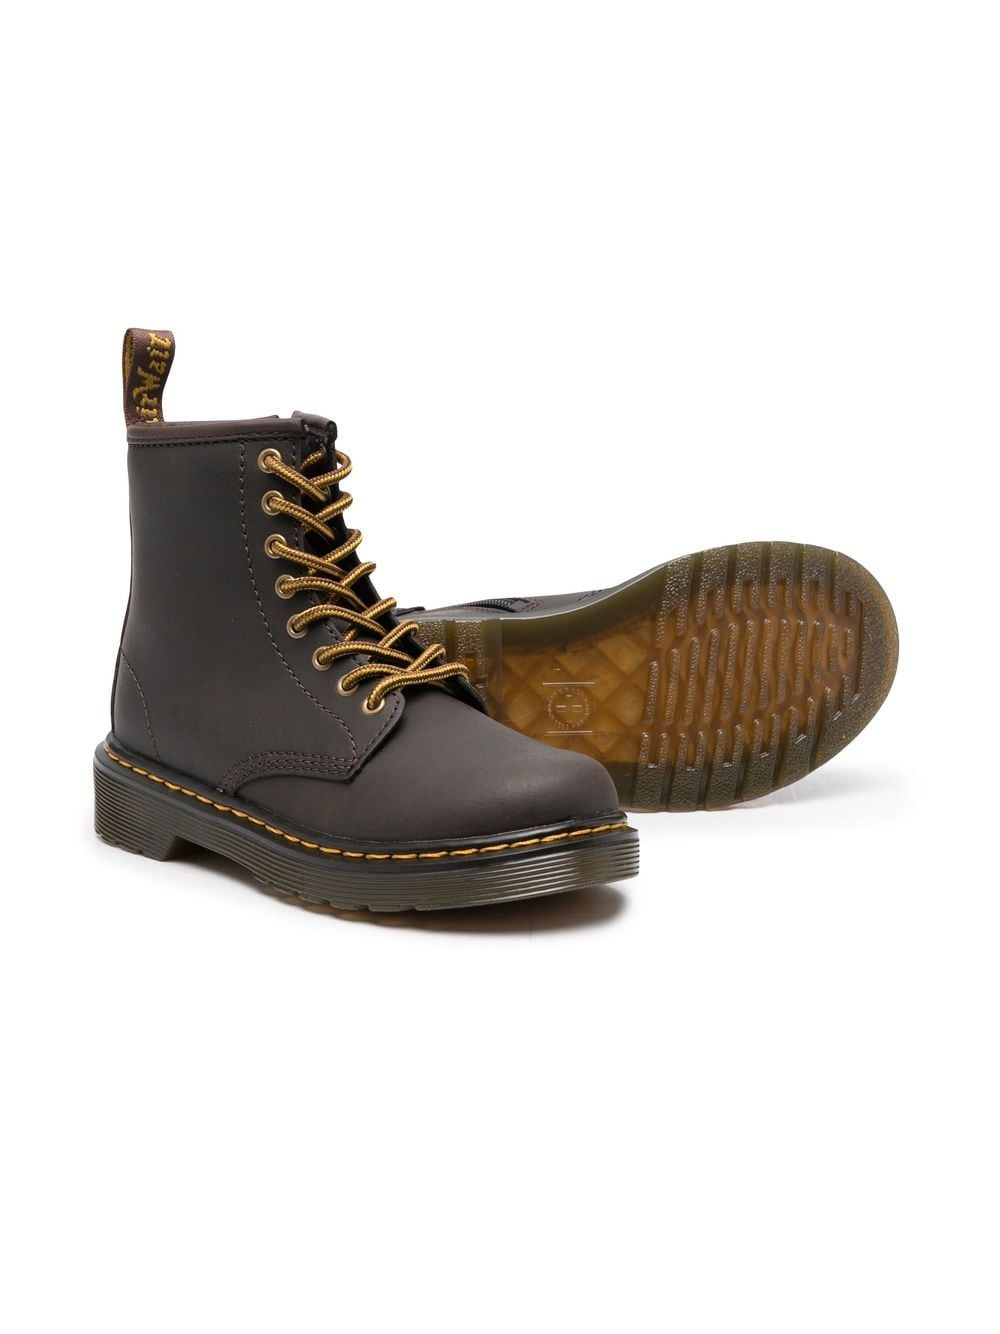 Image 2 of Dr. Martens Kids 1460 leather lace-up boots